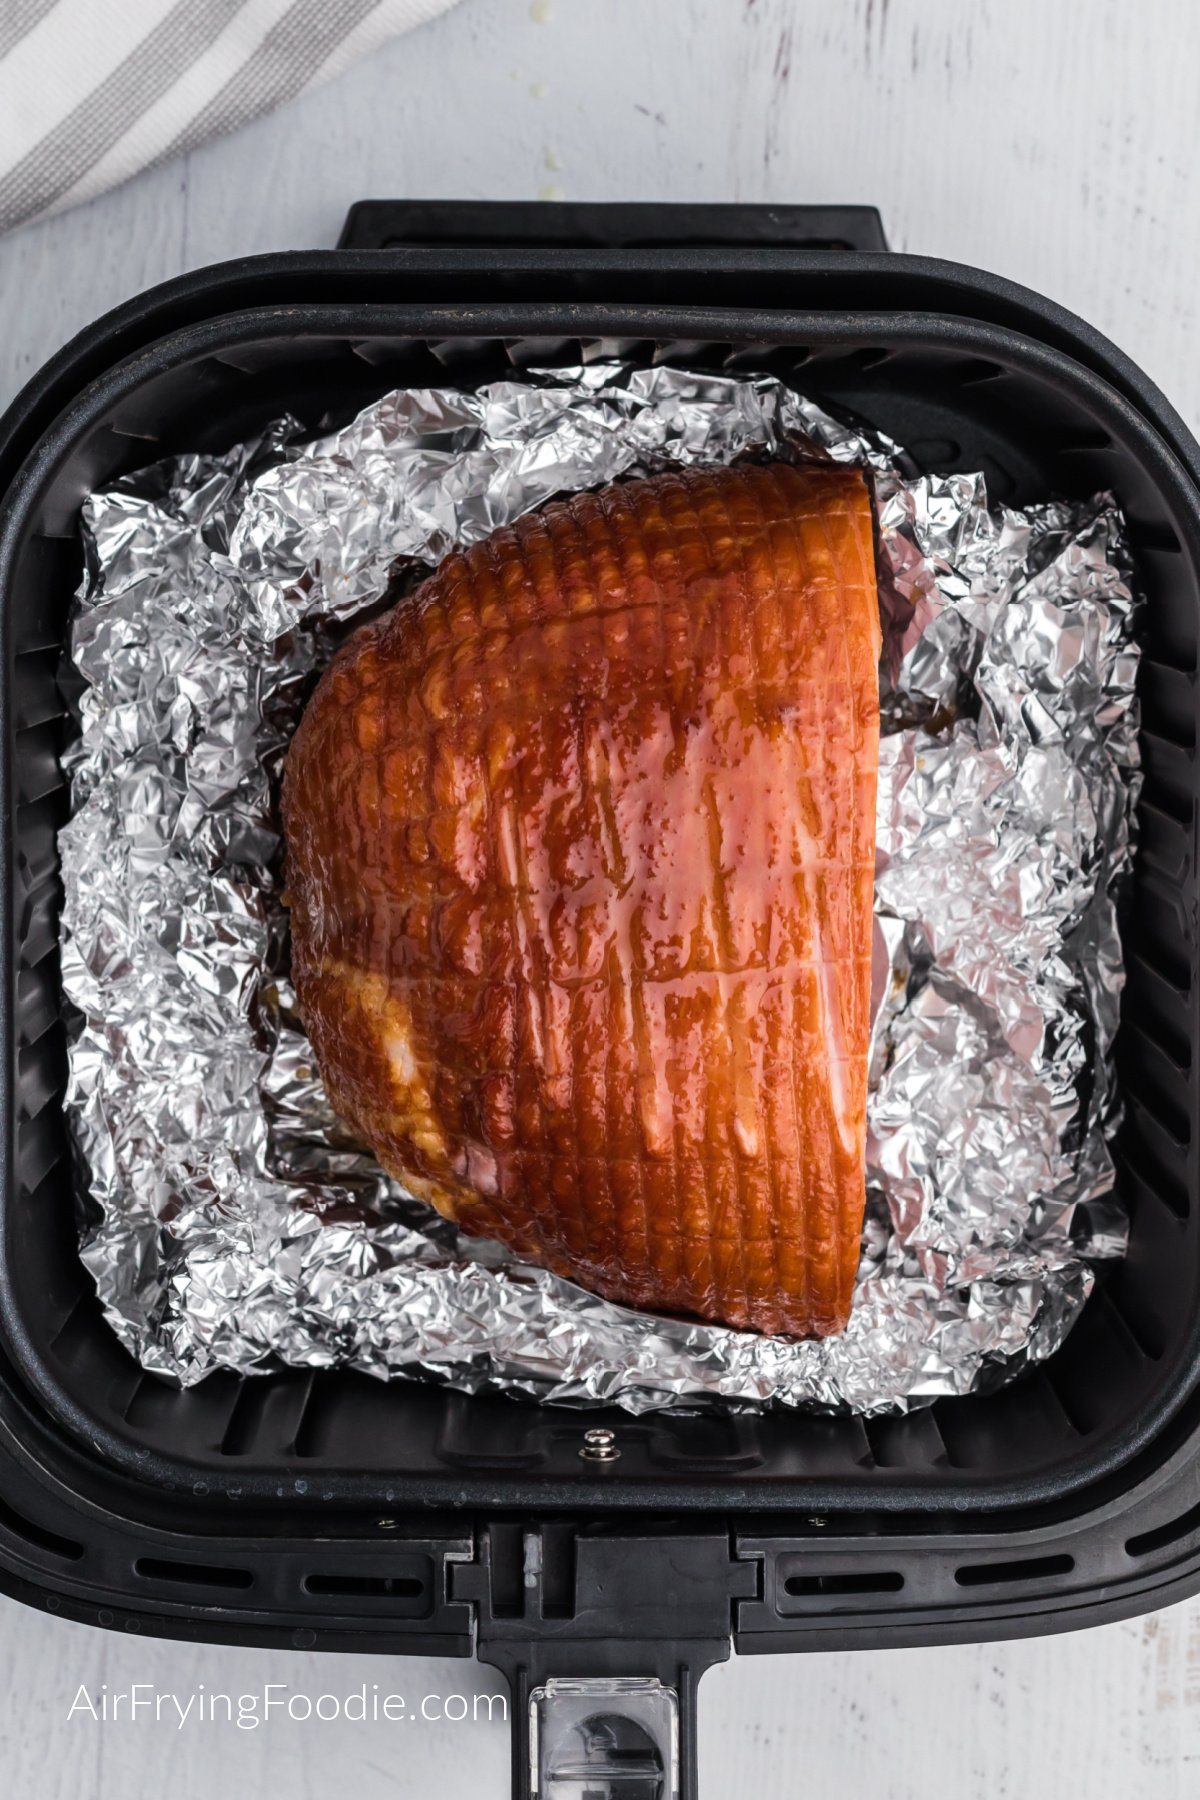 ham in air fryer basket laying on foil, ready to be served.